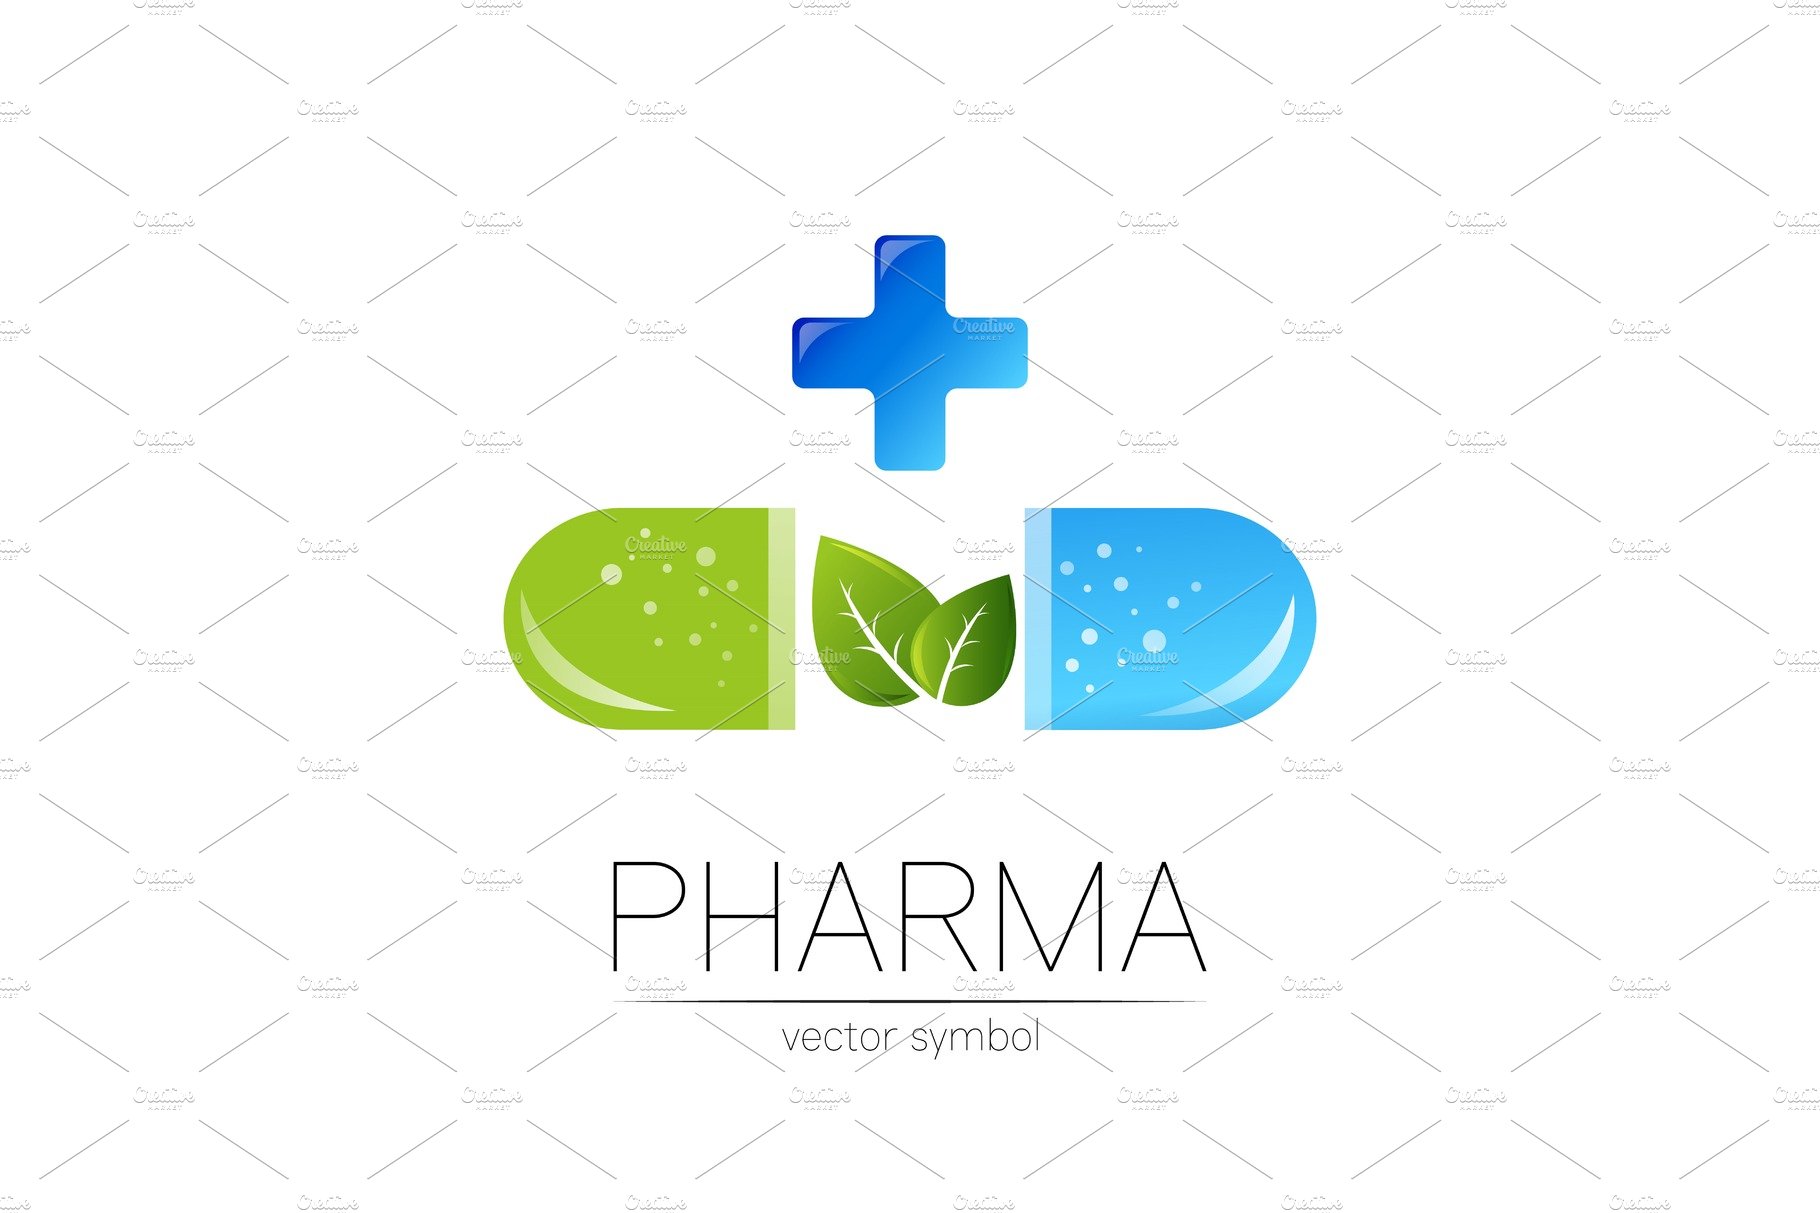 Pharmacy vector symbol with green cover image.